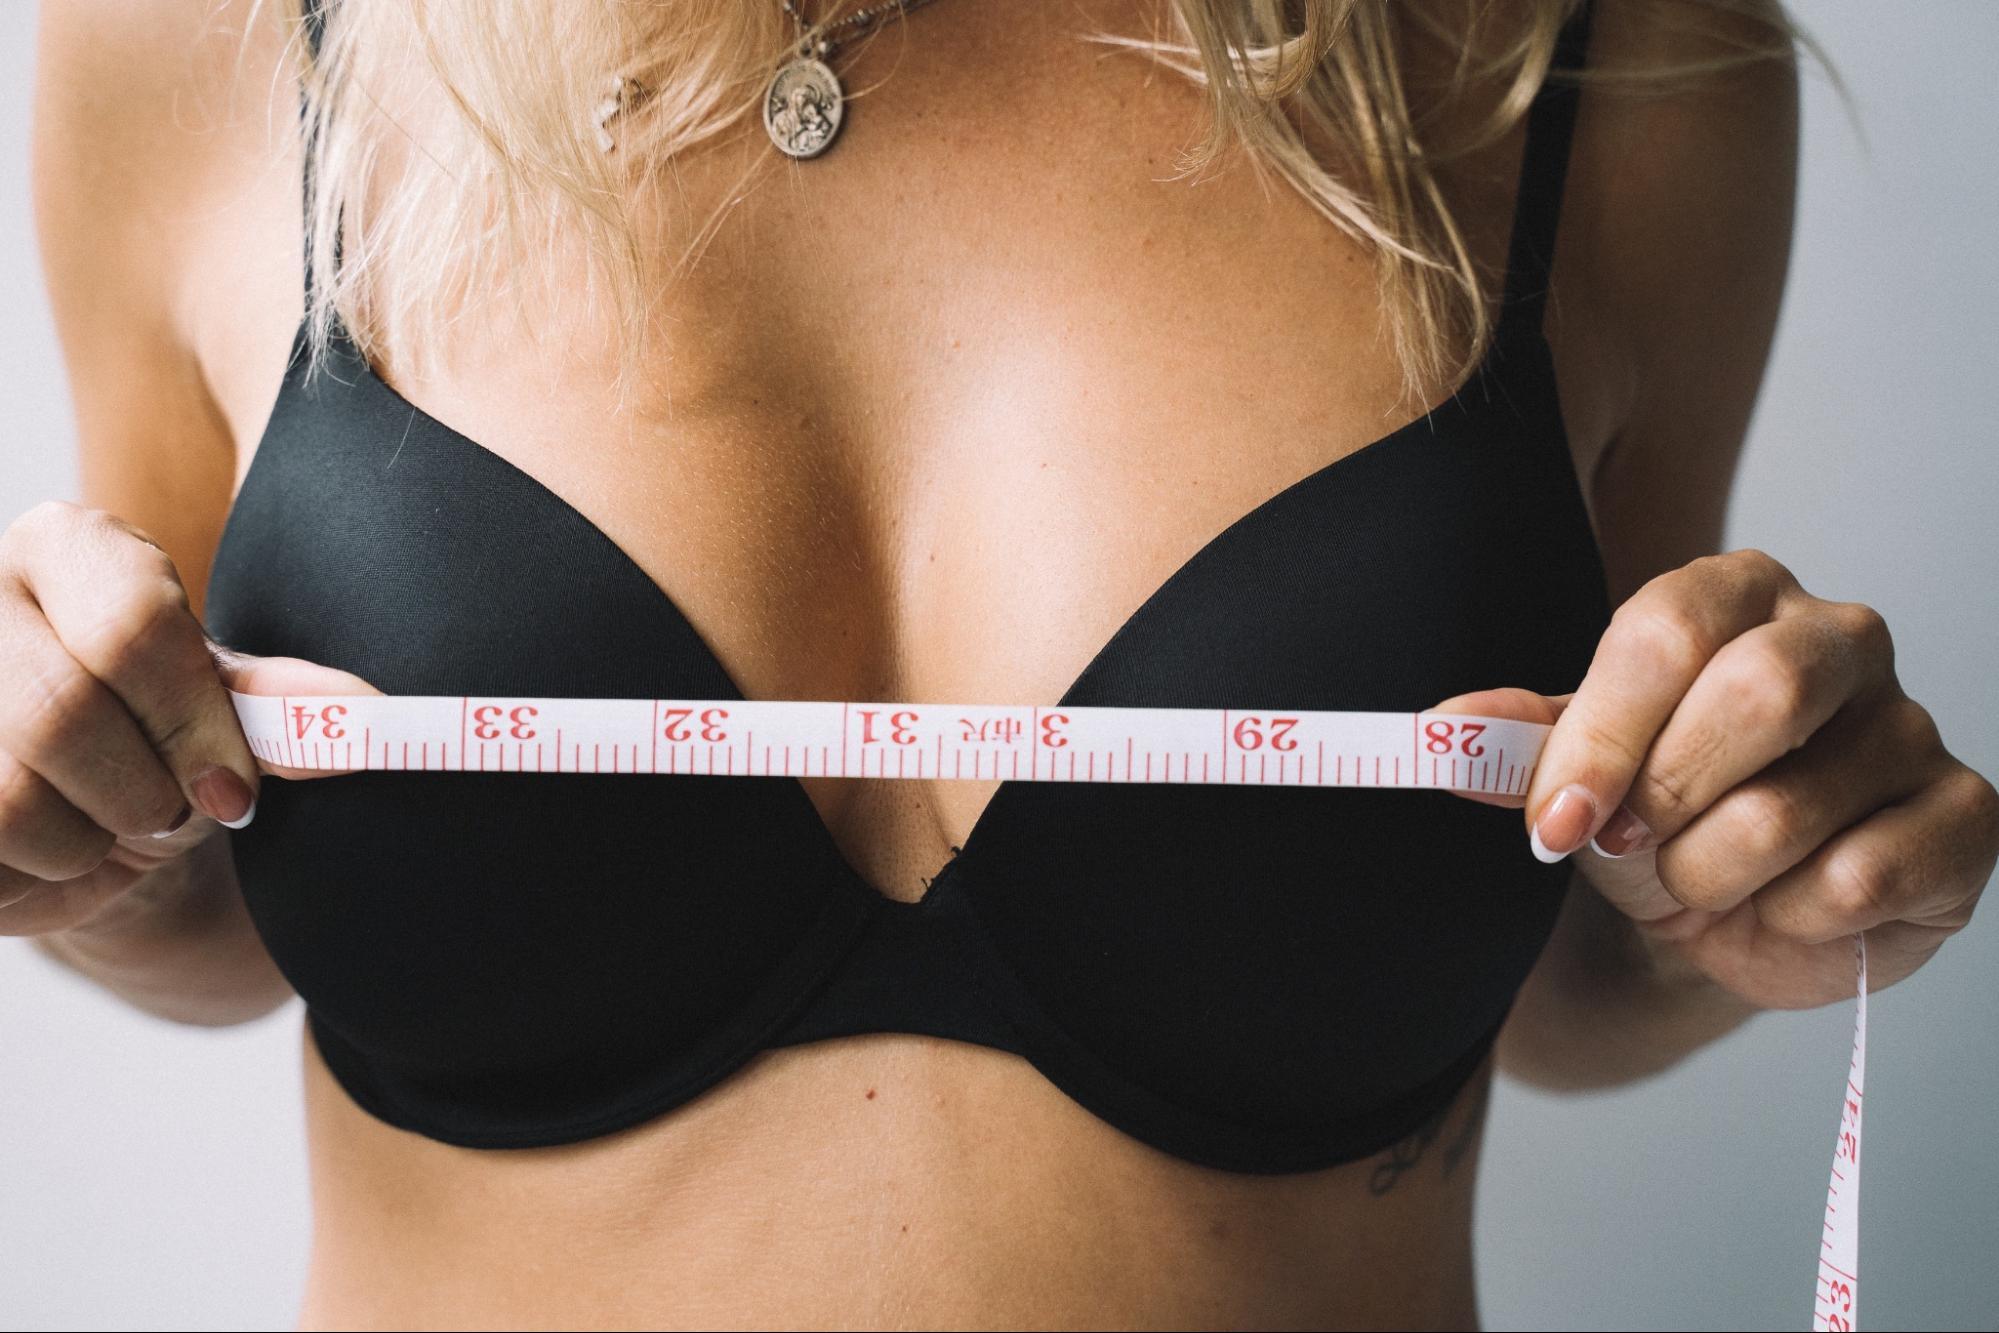 What is the smallest size of a bra? - Quora